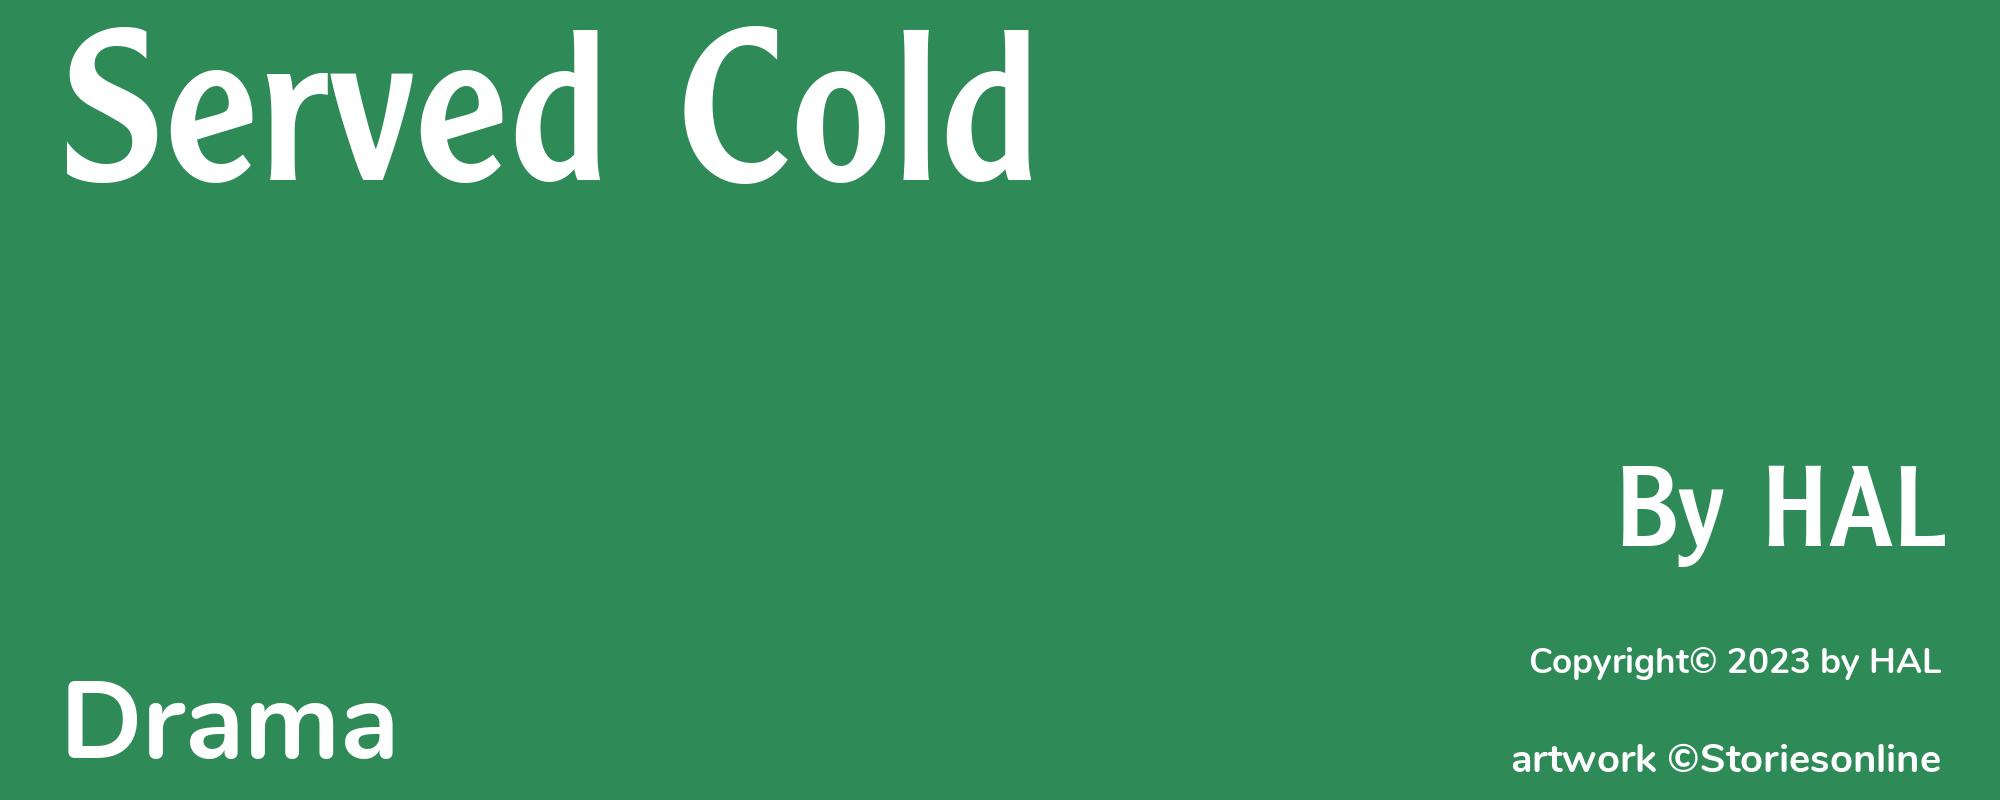 Served Cold - Cover